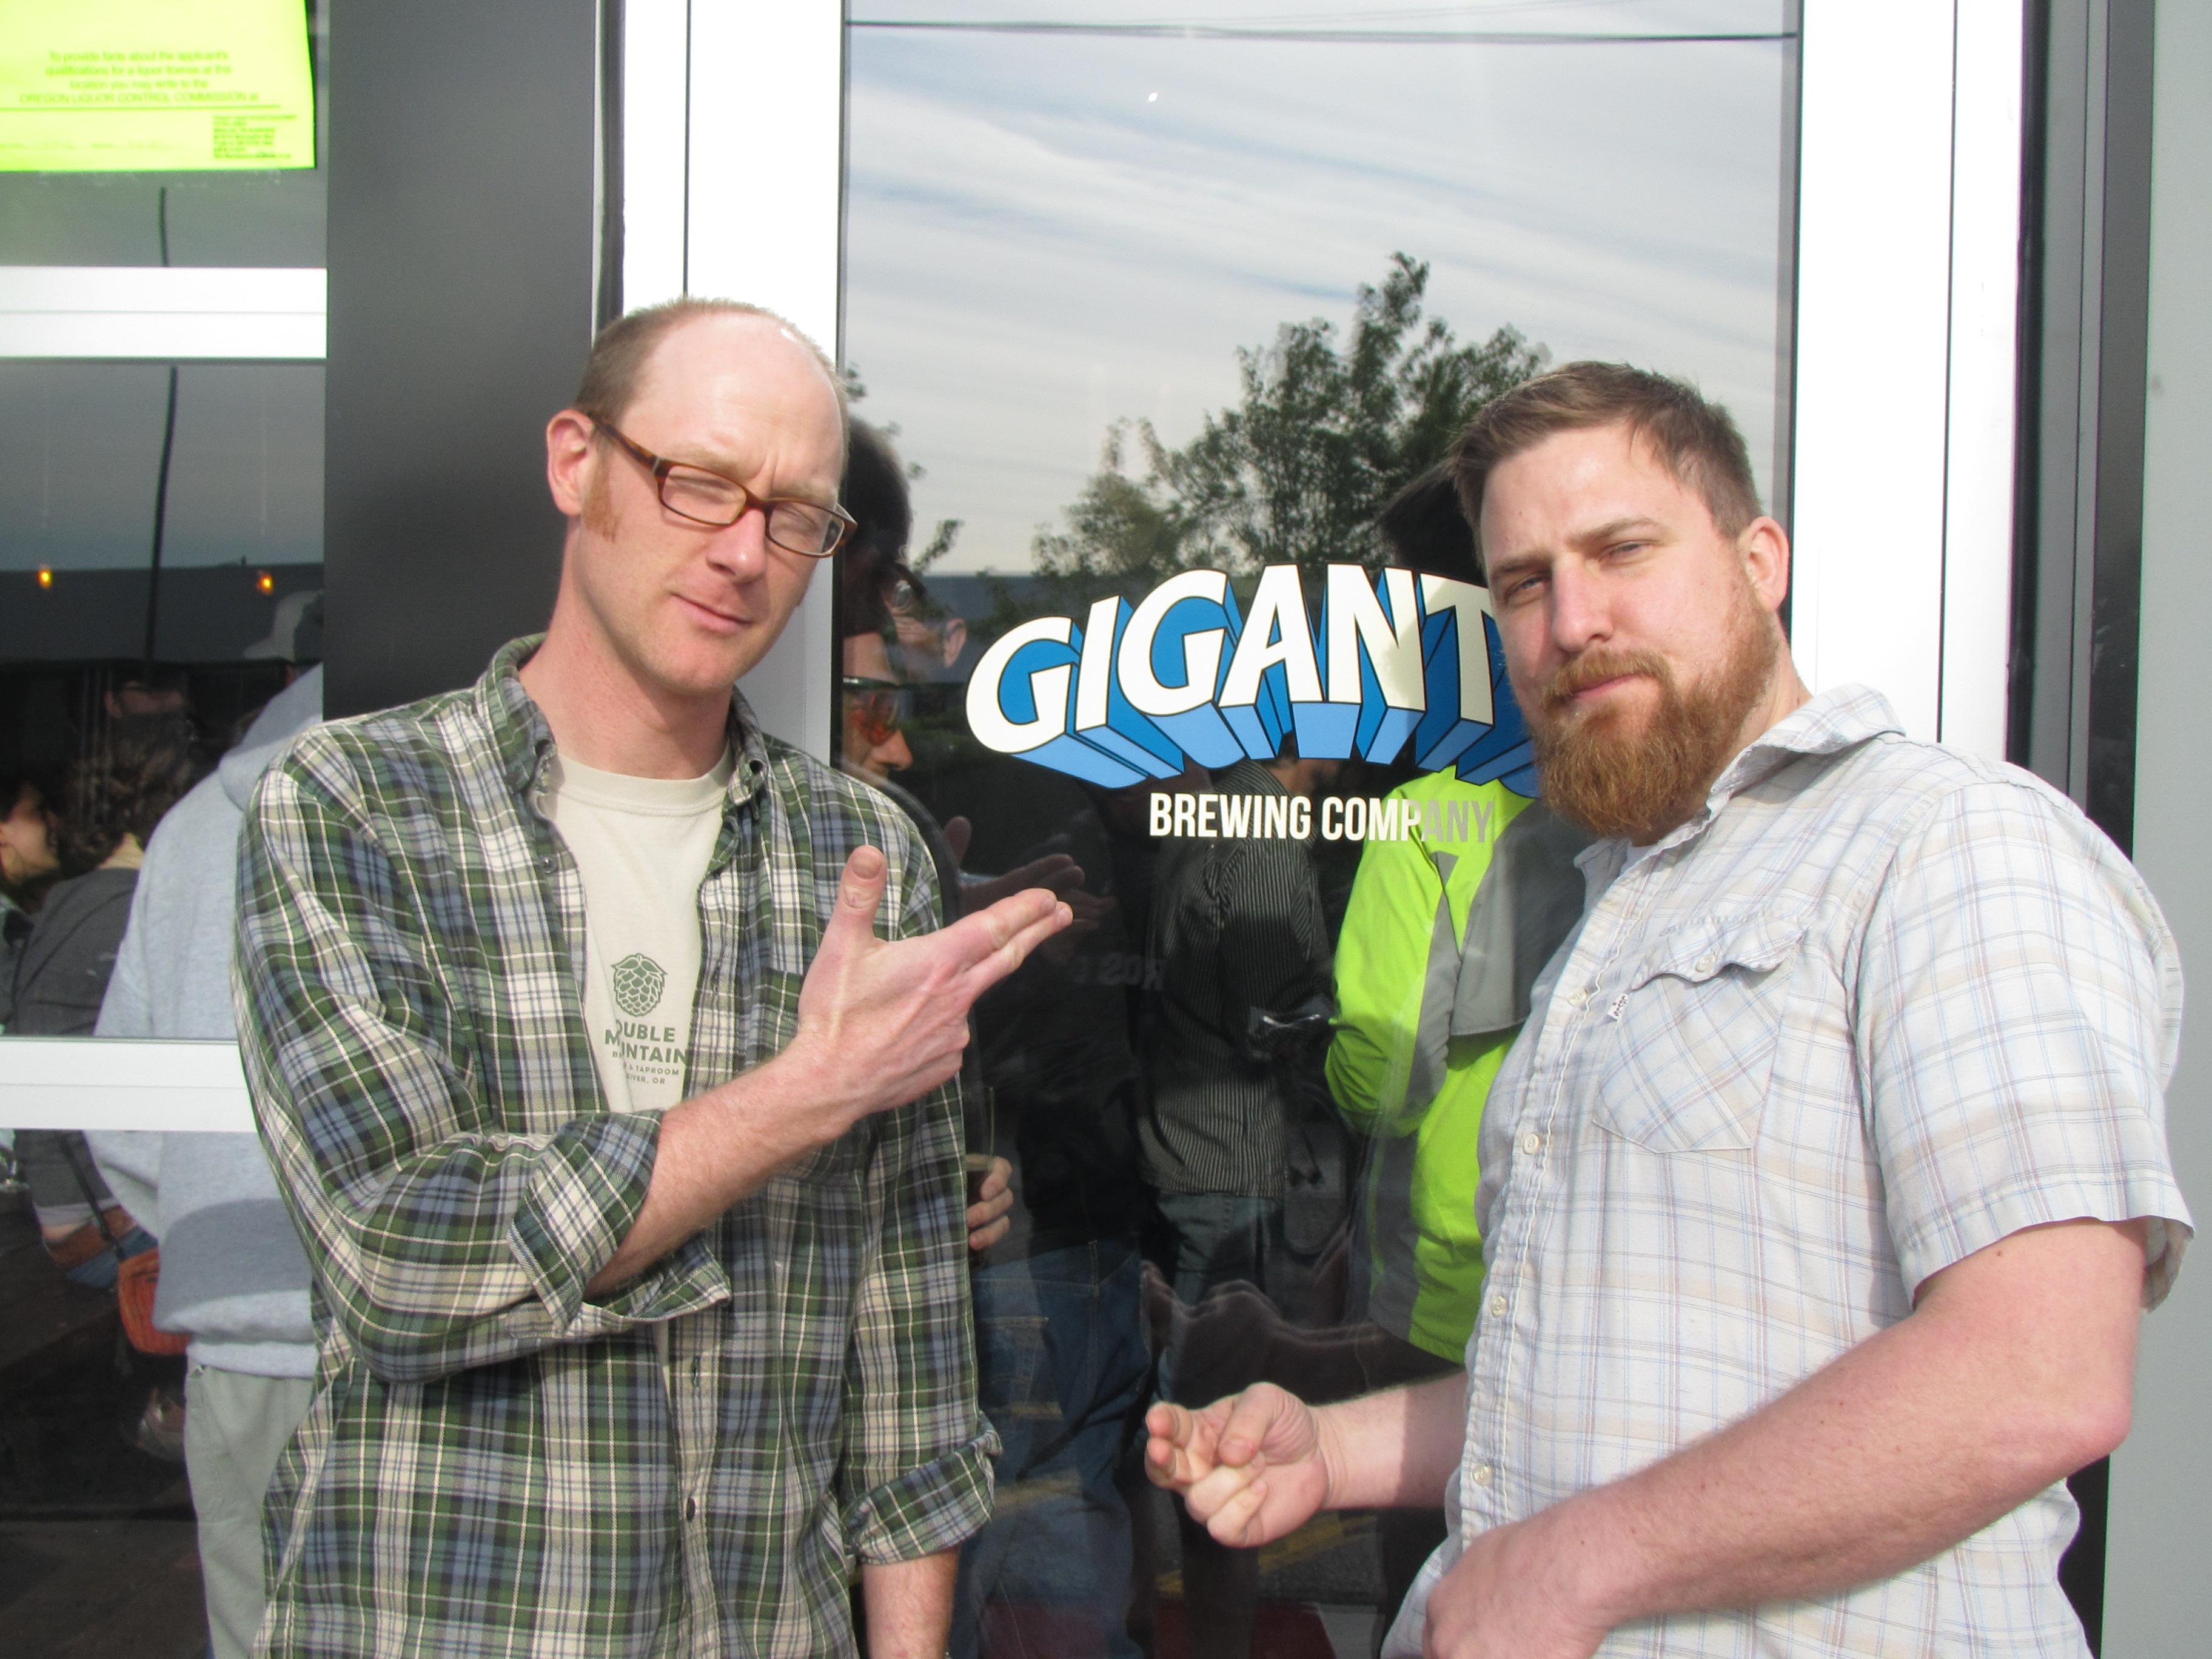 Gigantic Brewing founders Van Havig (left) and Ben Love at the brewery's opening on May 9, 2012, (photo by Angelo De Ieso)